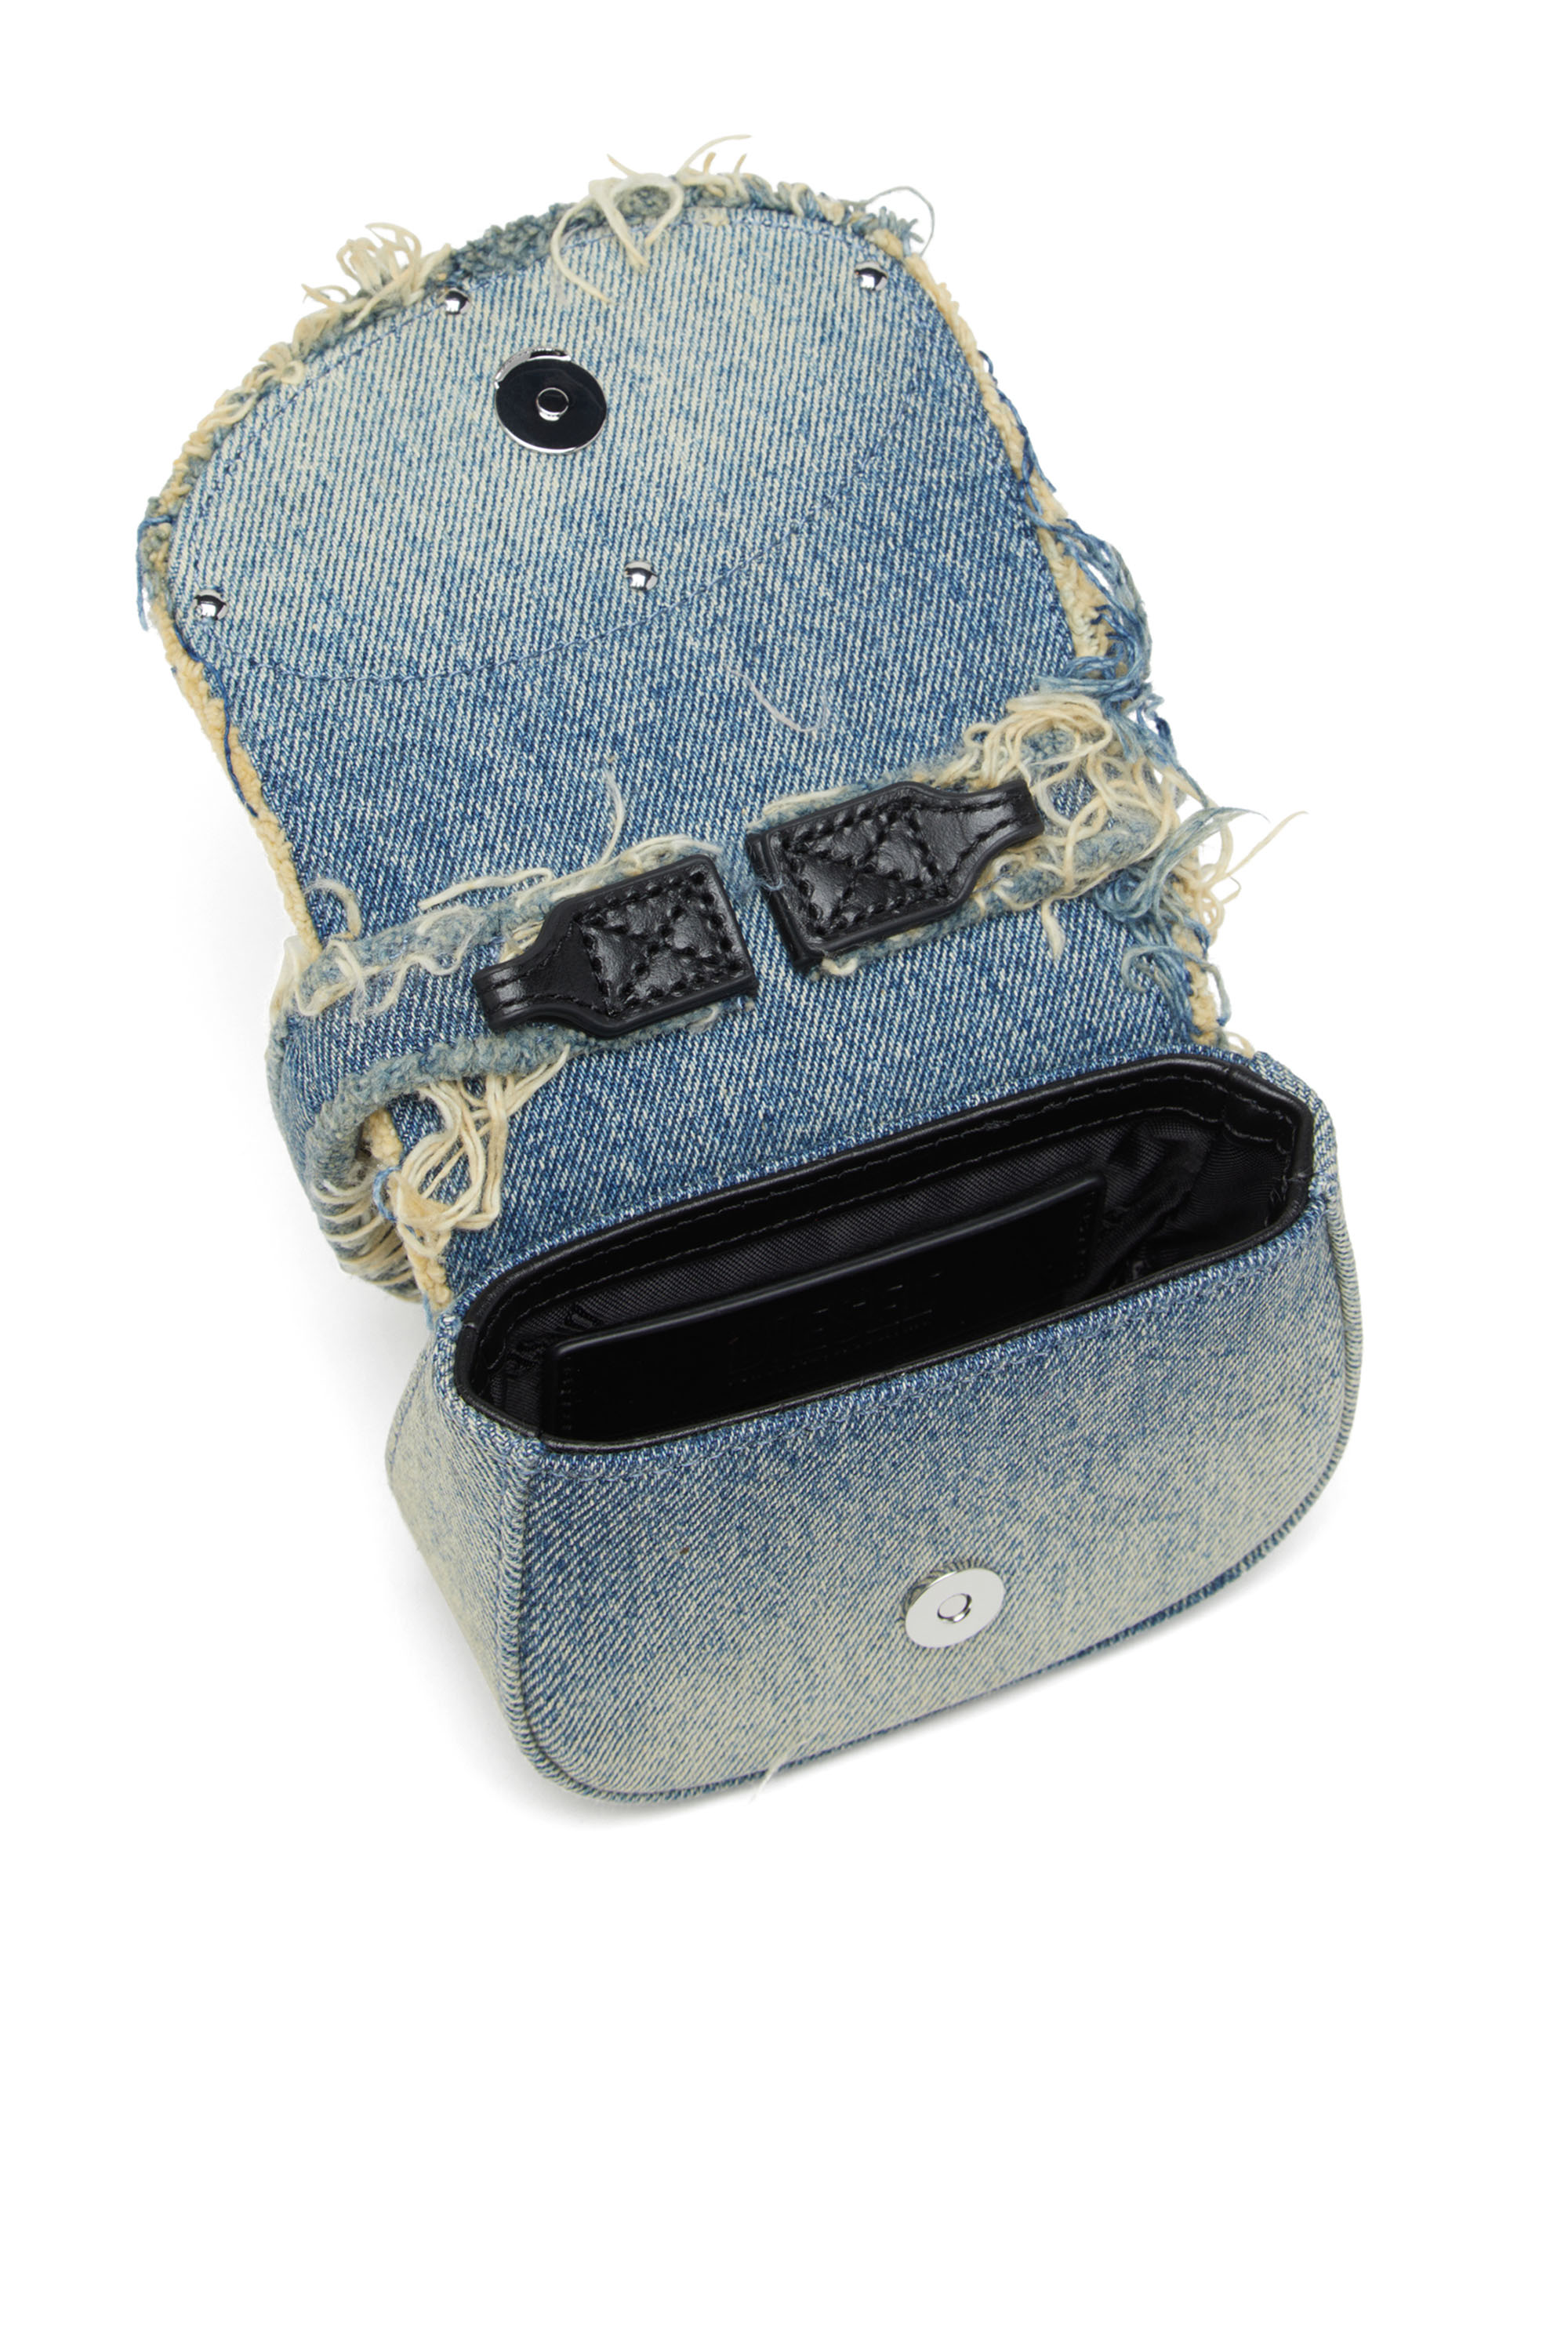 Diesel - 1DR XS, Female 1DR XS-Iconic mini bag in denim and crystals in ブルー - Image 4